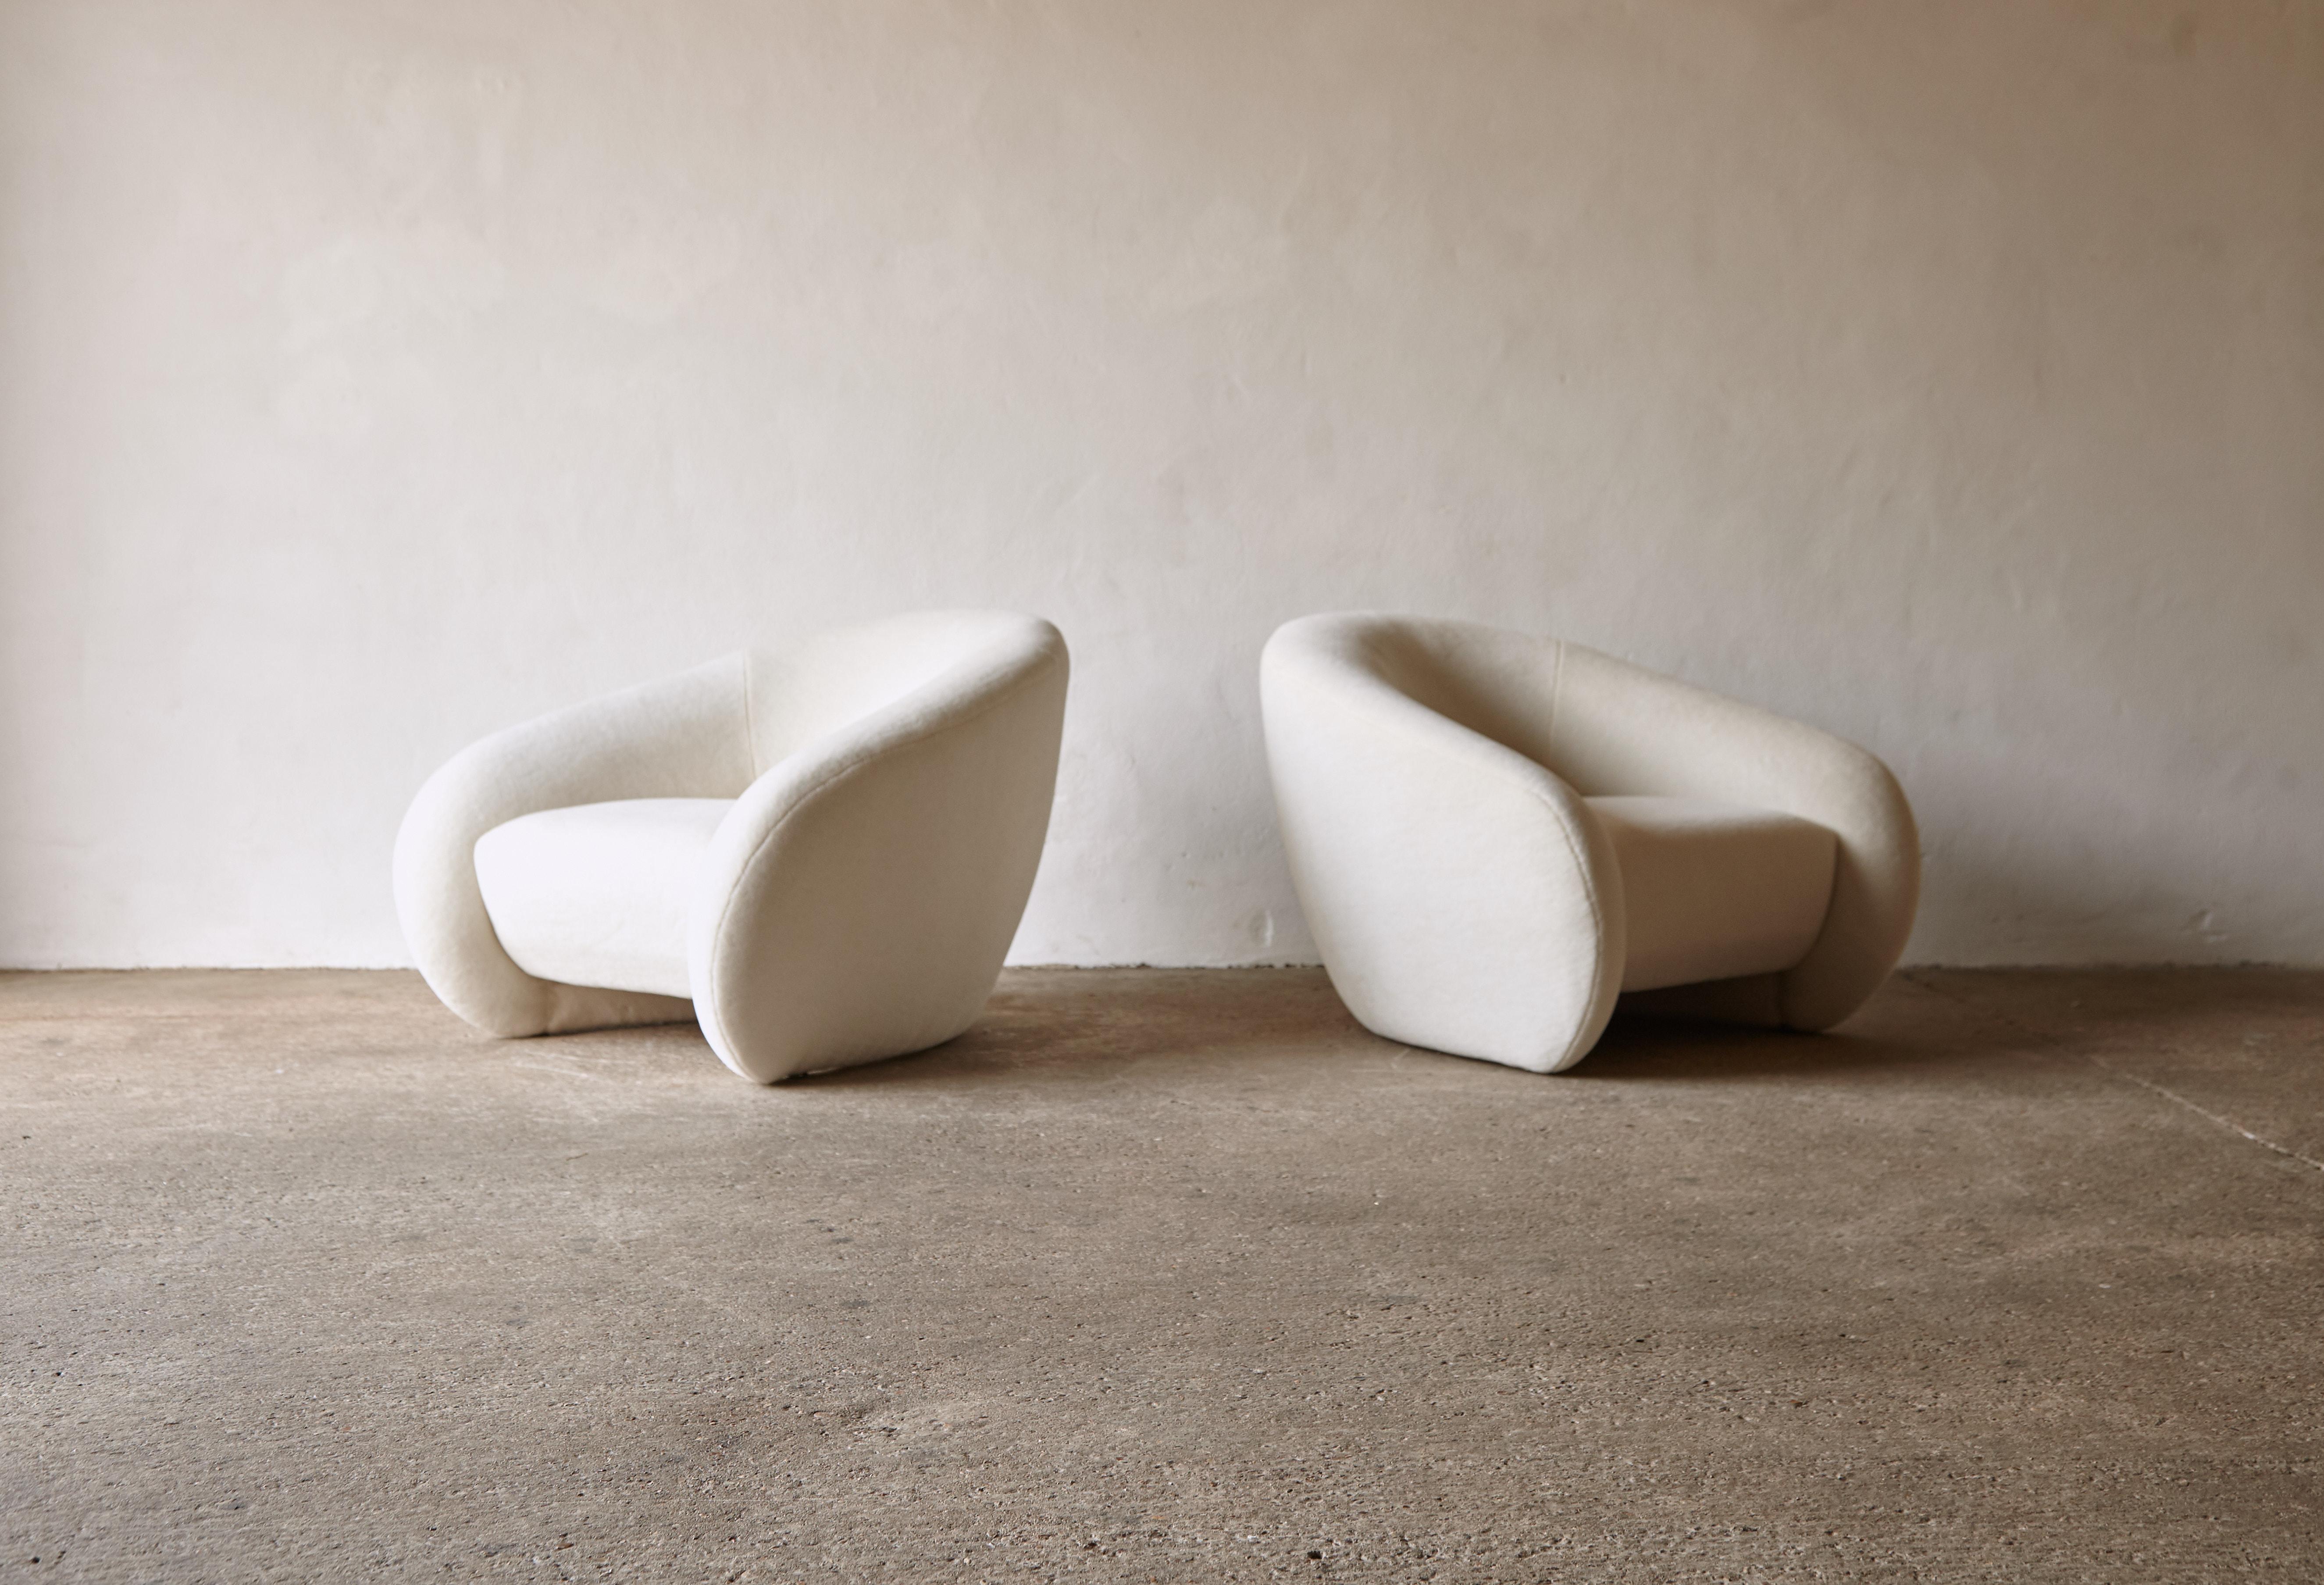 A superb pair of curved organic form armchairs, Italian design, newly upholstered in a premium pure 100% alpaca wool fabric. Fast shipping worldwide.
  

